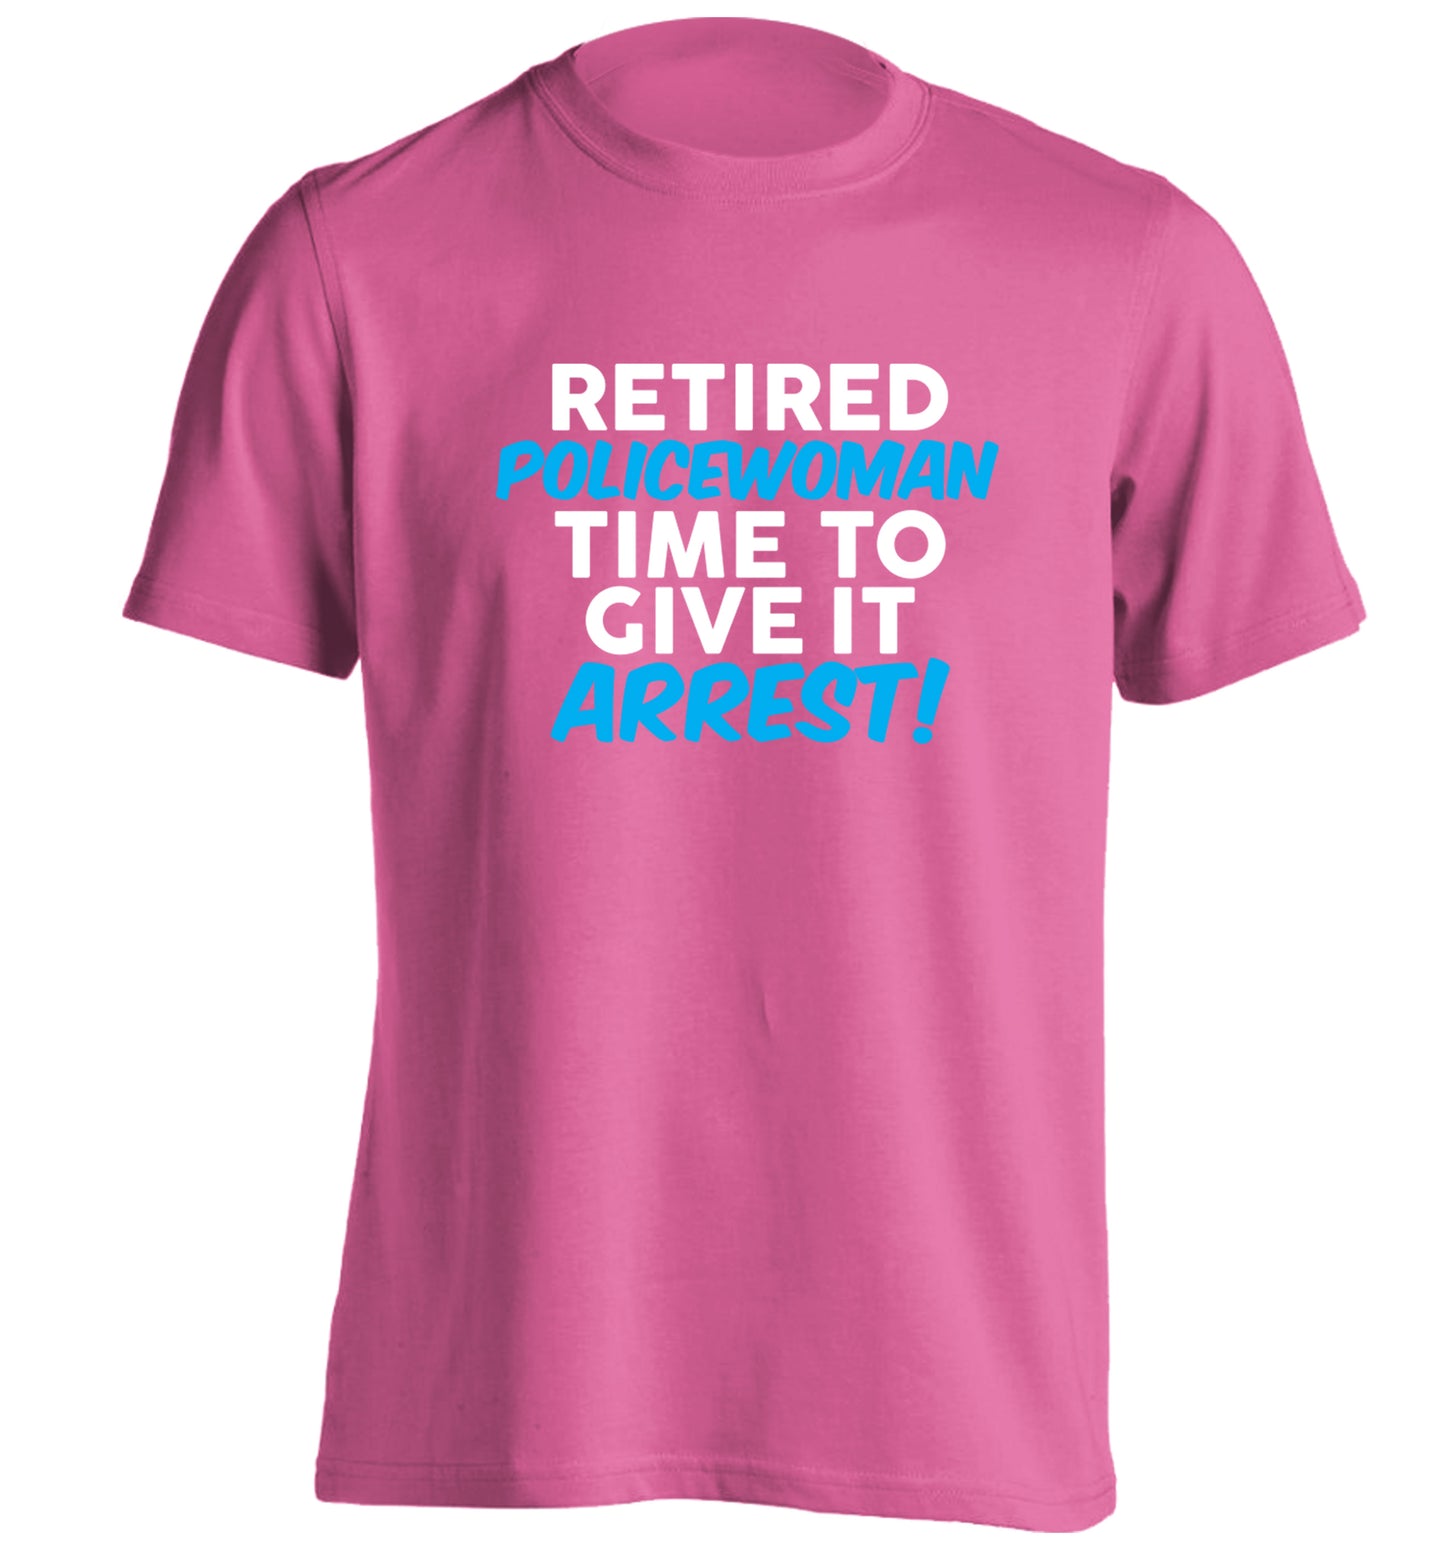 Retired policewoman time to give it arrest adults unisex pink Tshirt 2XL